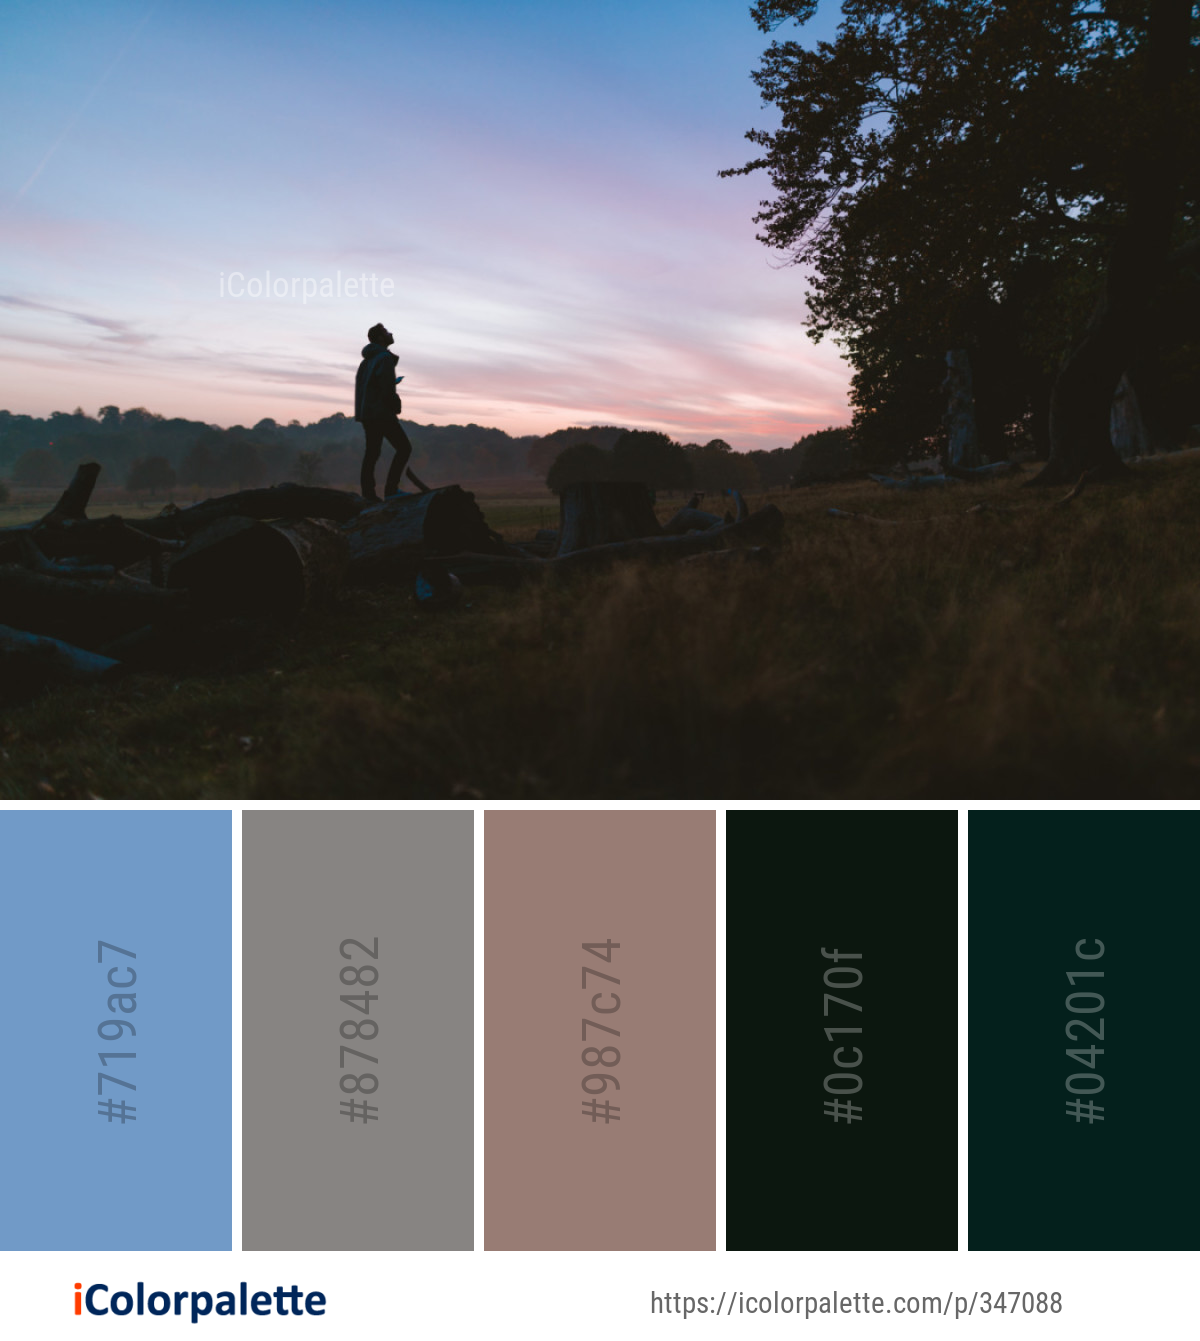 Color Palette Ideas from Sky Tree Dawn Image